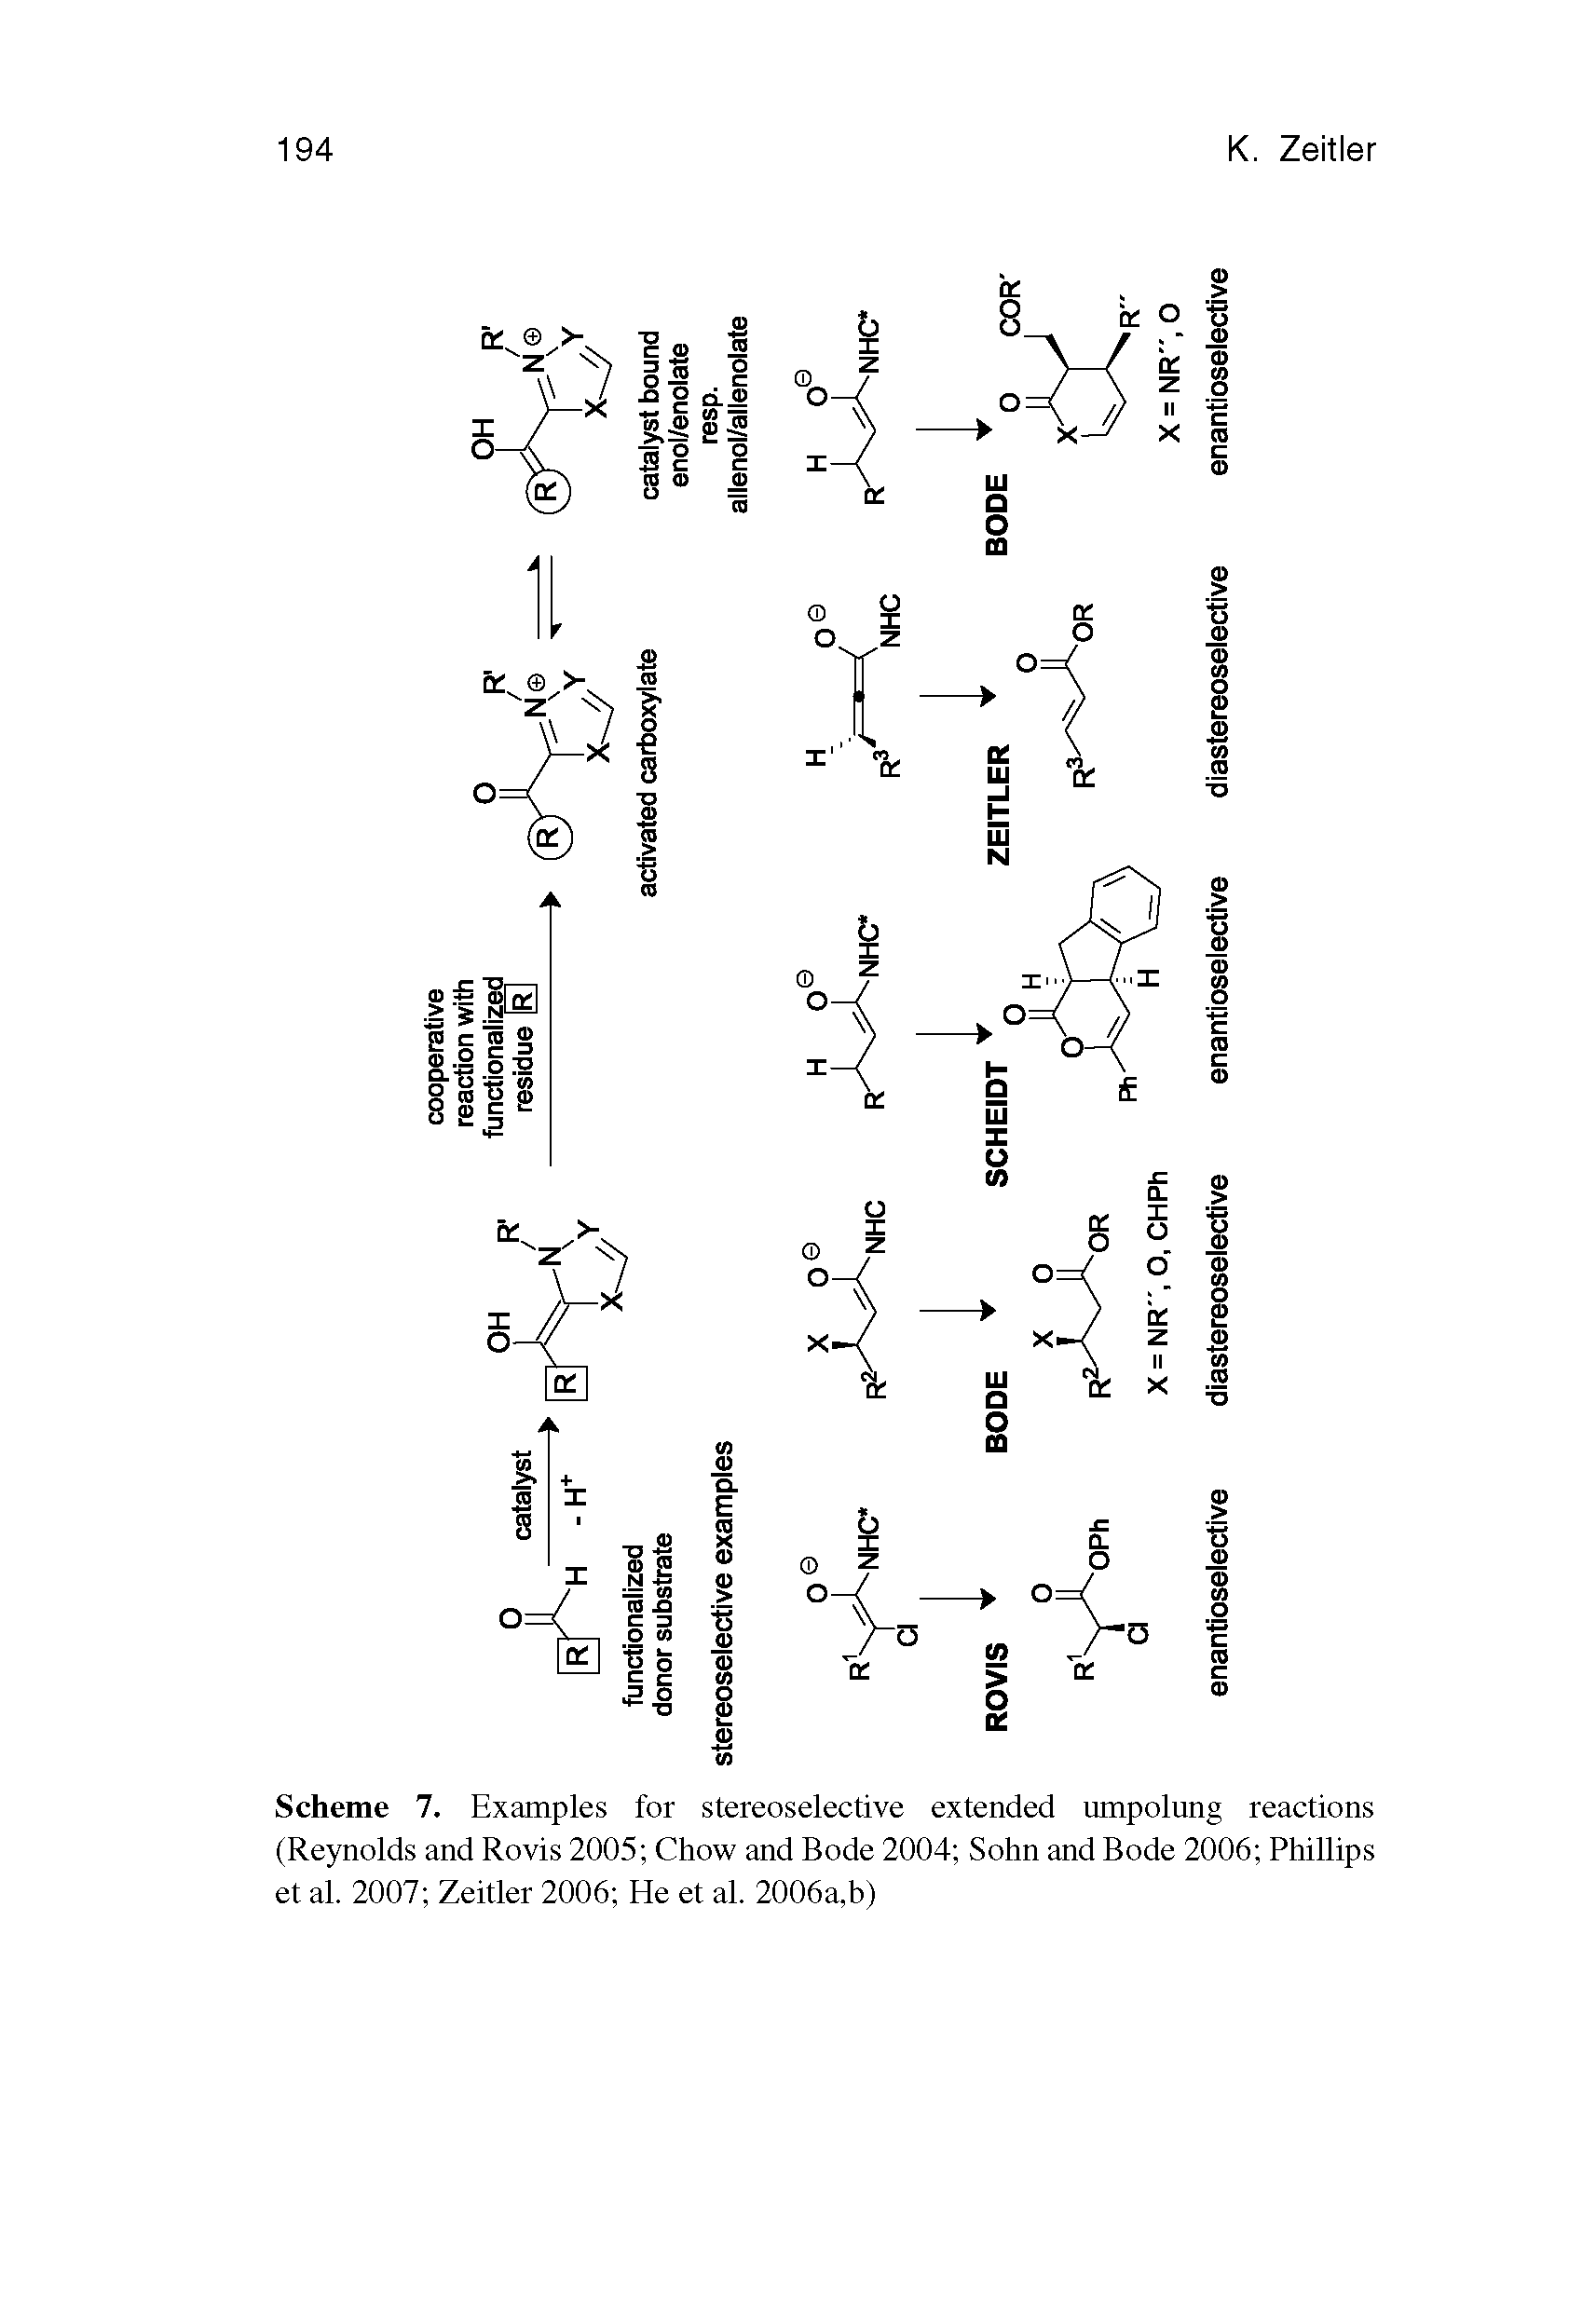 Scheme 7. Examples for stereoselective extended umpolung reactions (Reynolds and Rovis 2005 Chow and Bode 2004 Sohn and Bode 2006 Phillips et al. 2007 Zeitler 2006 He et al. 2006a,b)...